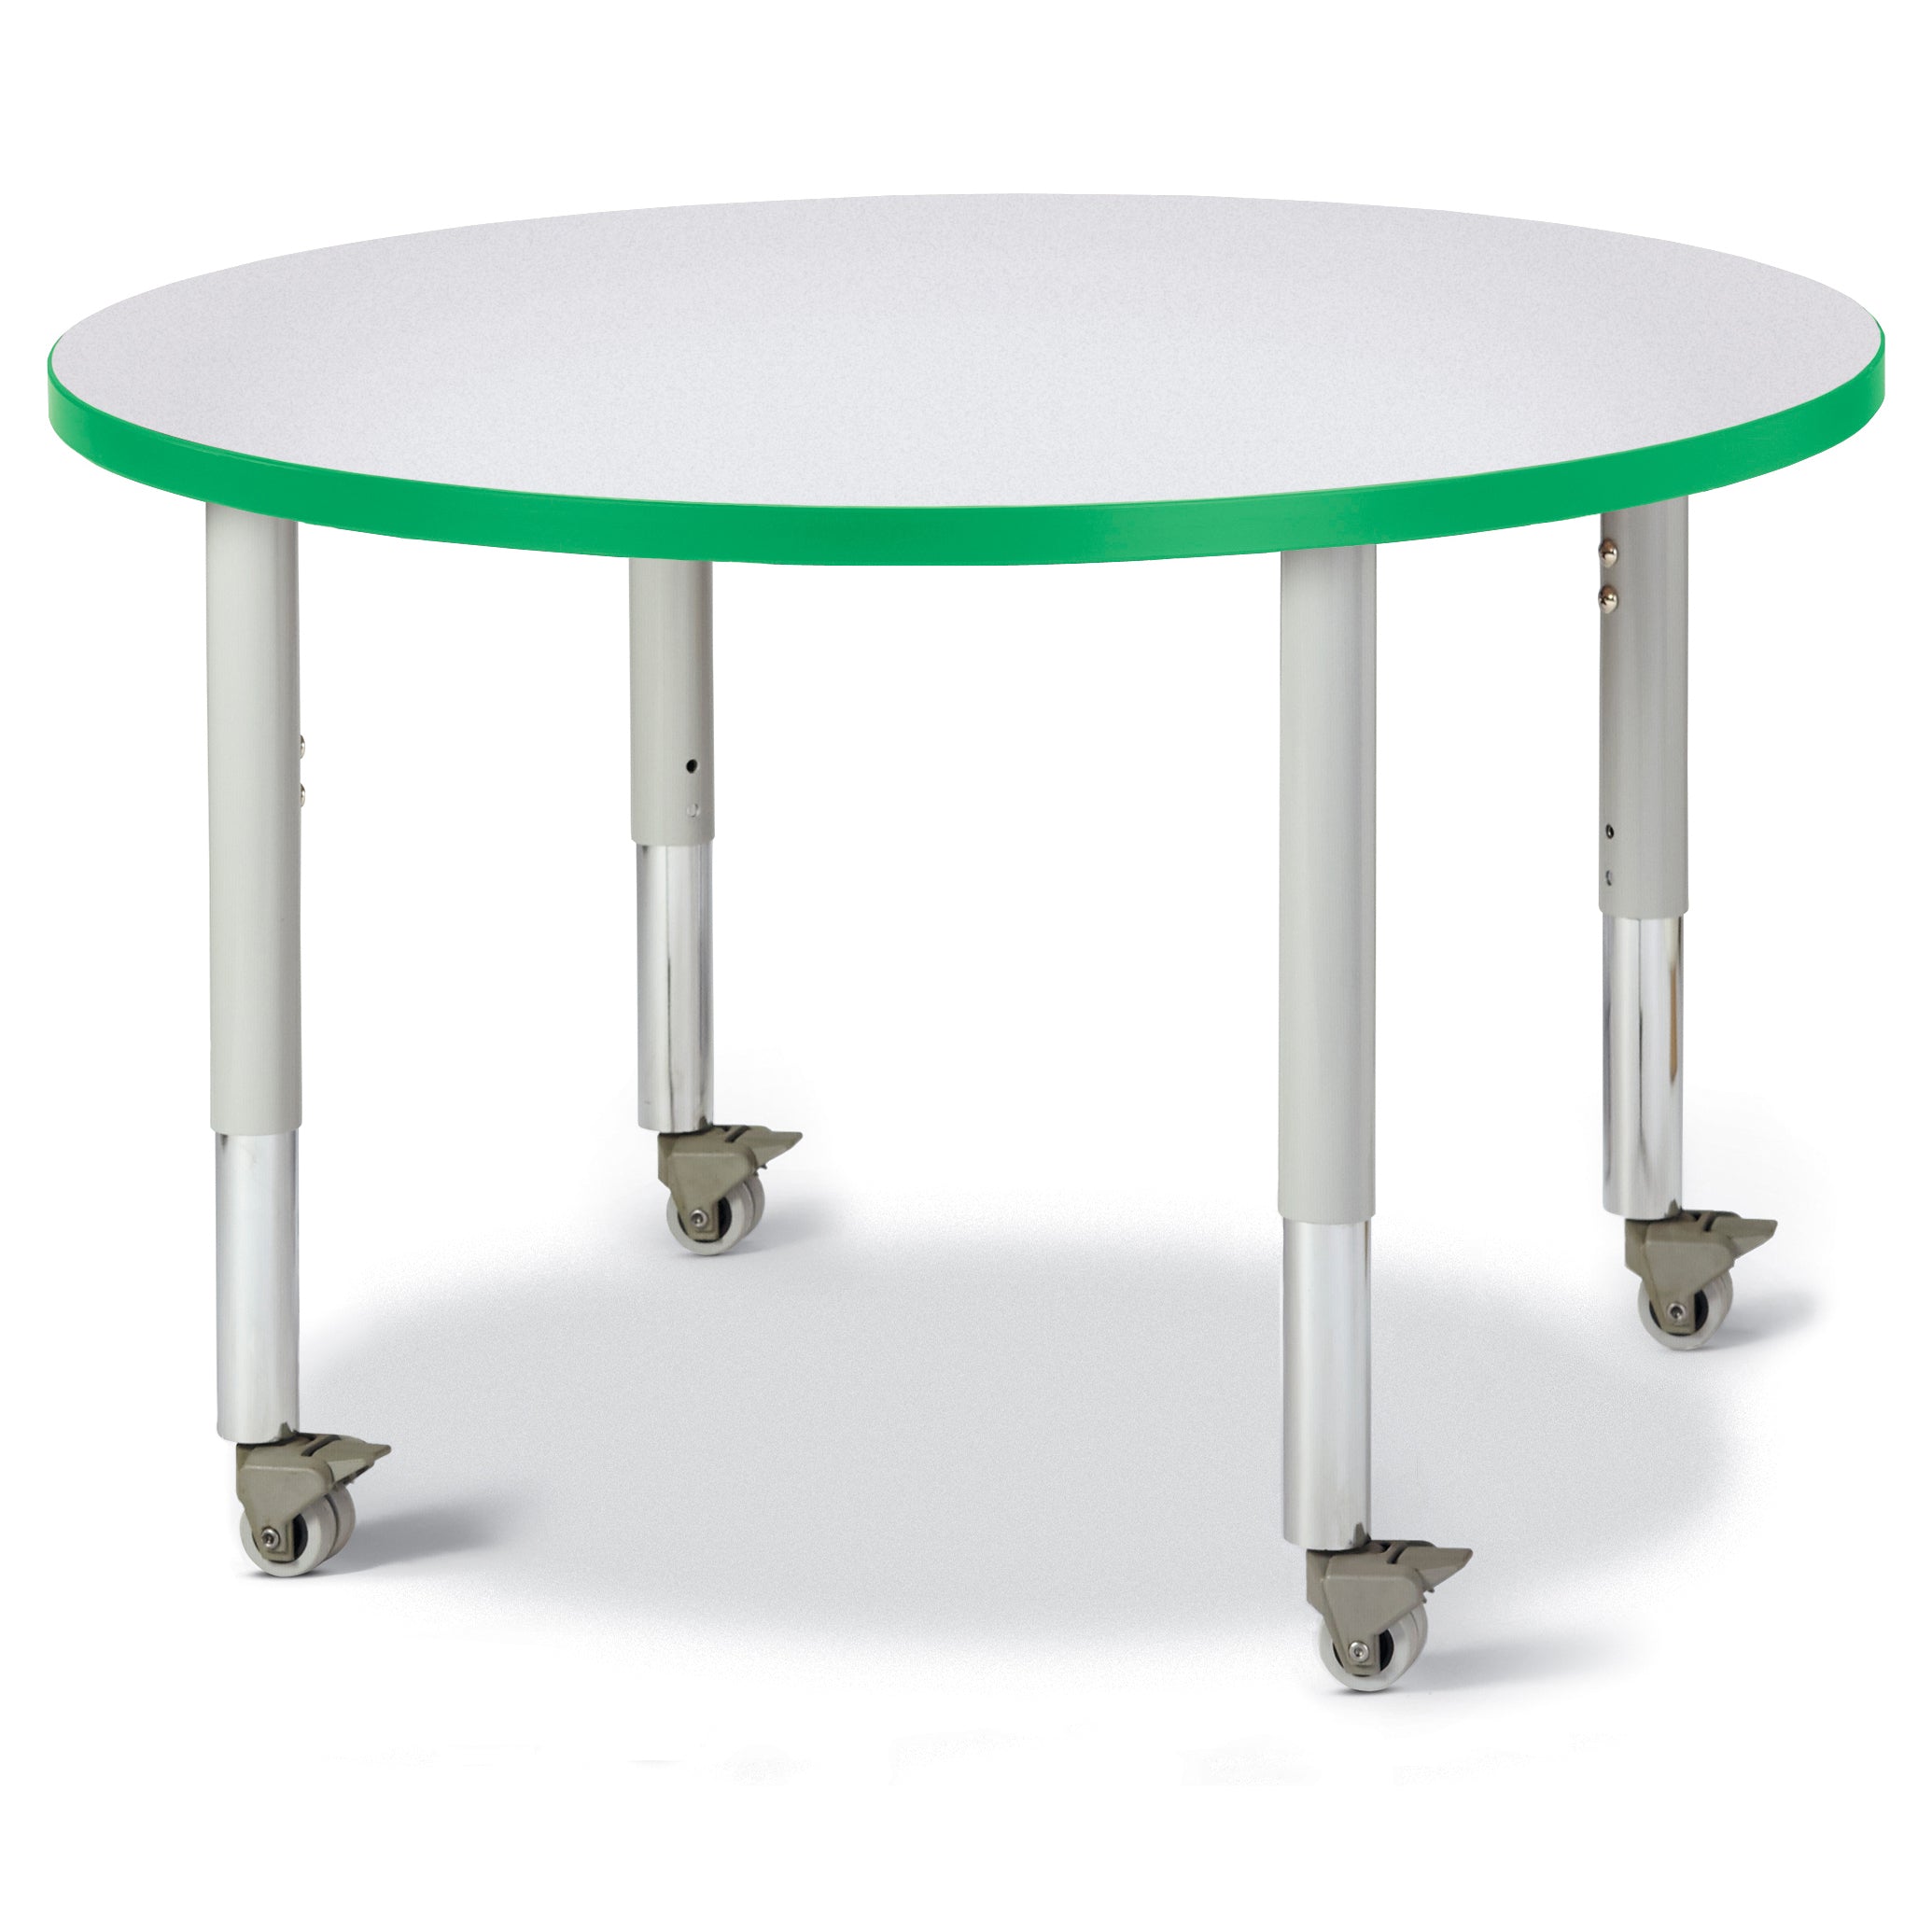 6488JCM119, Berries Round Activity Table - 36" Diameter, Mobile - Freckled Gray/Green/Gray